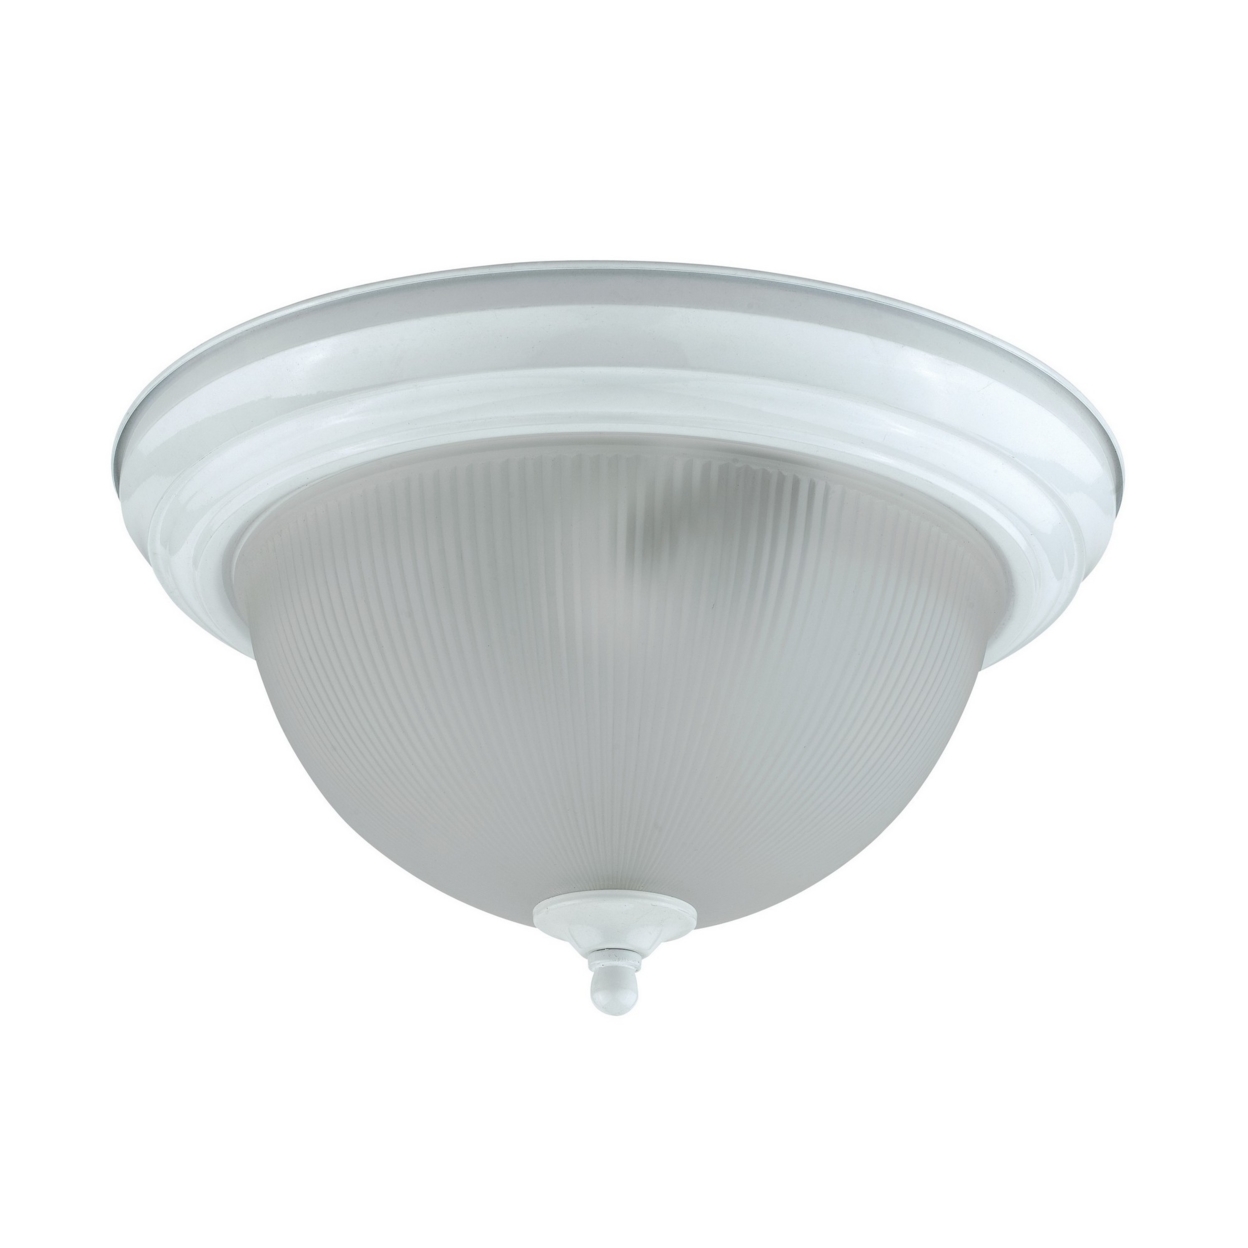 Hoy 11 Inch Ceiling Lamp, Glass Dome Shade With Finial, Polished White Trim- Saltoro Sherpi